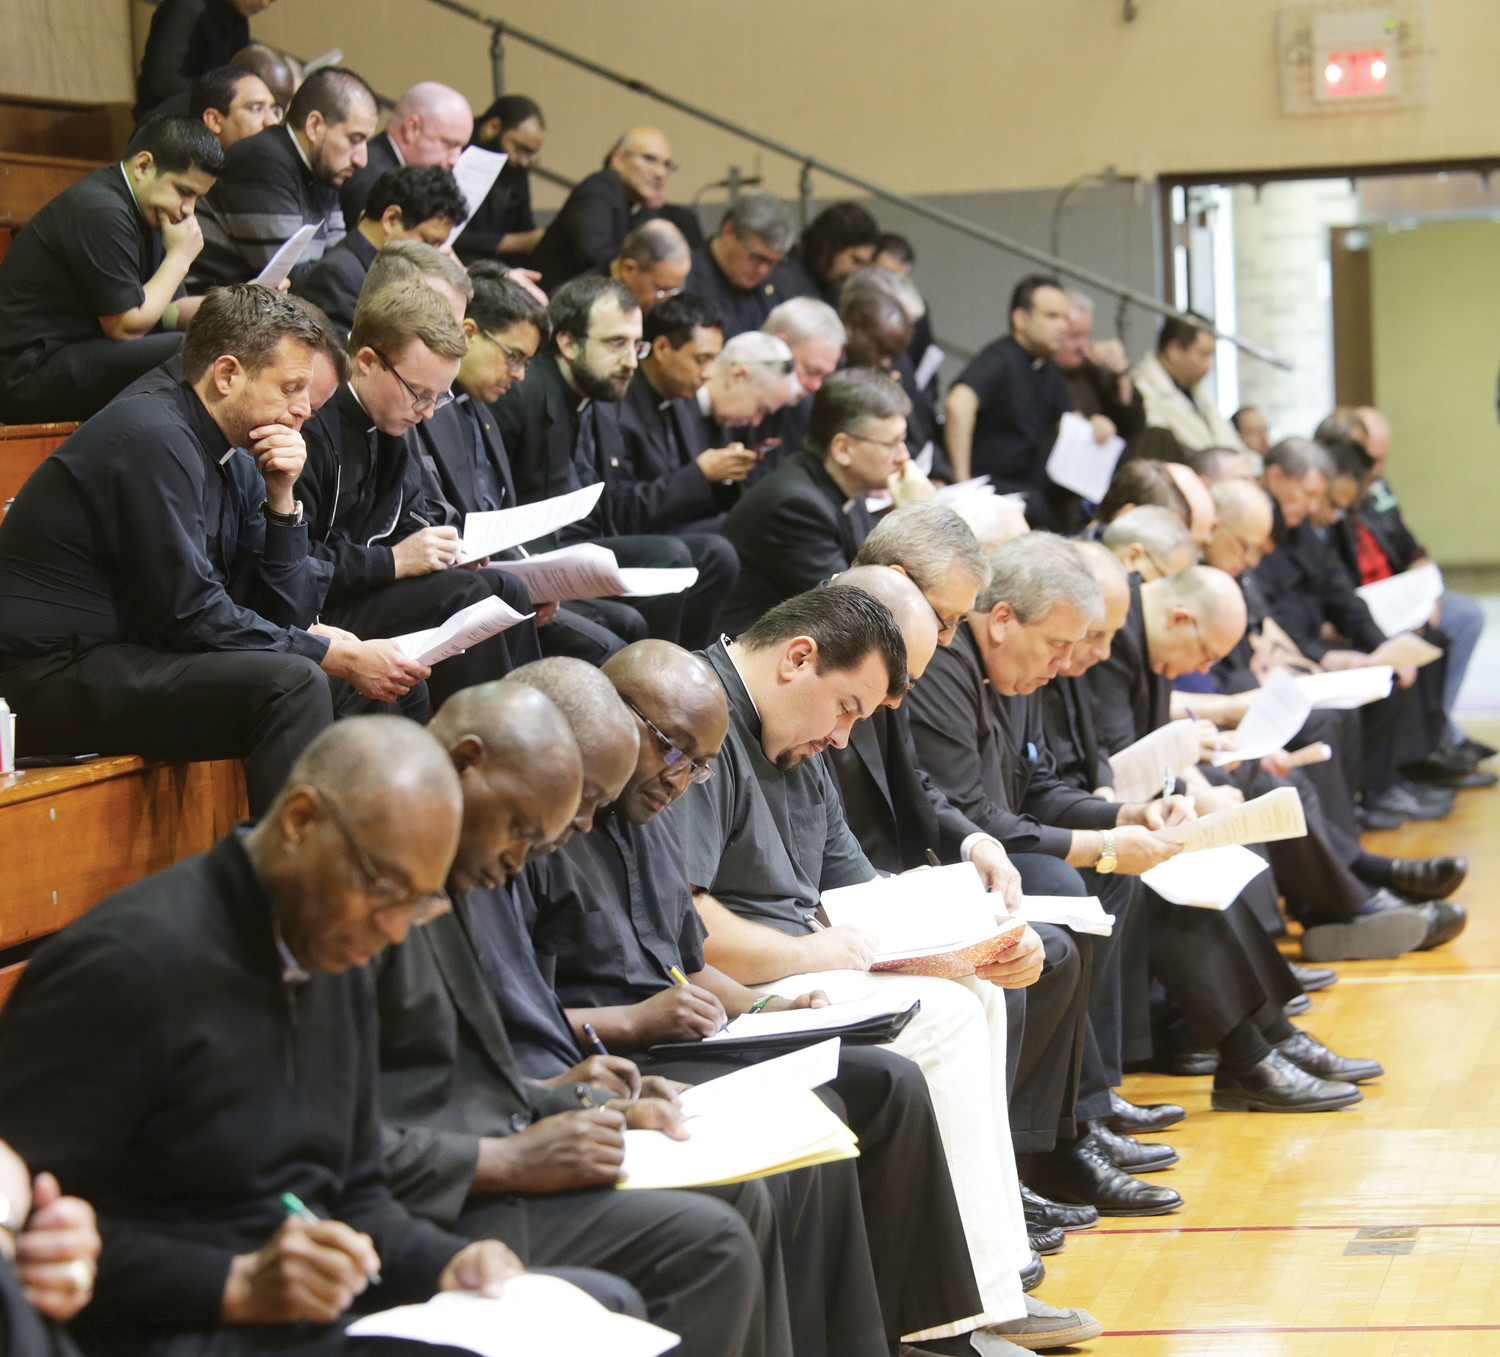 PASTOR TO PASTORS—New York priests take careful notes on handout materials during the second session of the Safe Environment Convocation, at which Pastor Rick Warren spoke on “Maintaining the Moral Integrity of the Ministry to Which God Has Called Us.” Nearly 800 priests heard the Evangelical pastor June 6-7 at Cardinal Spellman Center at St. Joseph’s Seminary in Dunwoodie.